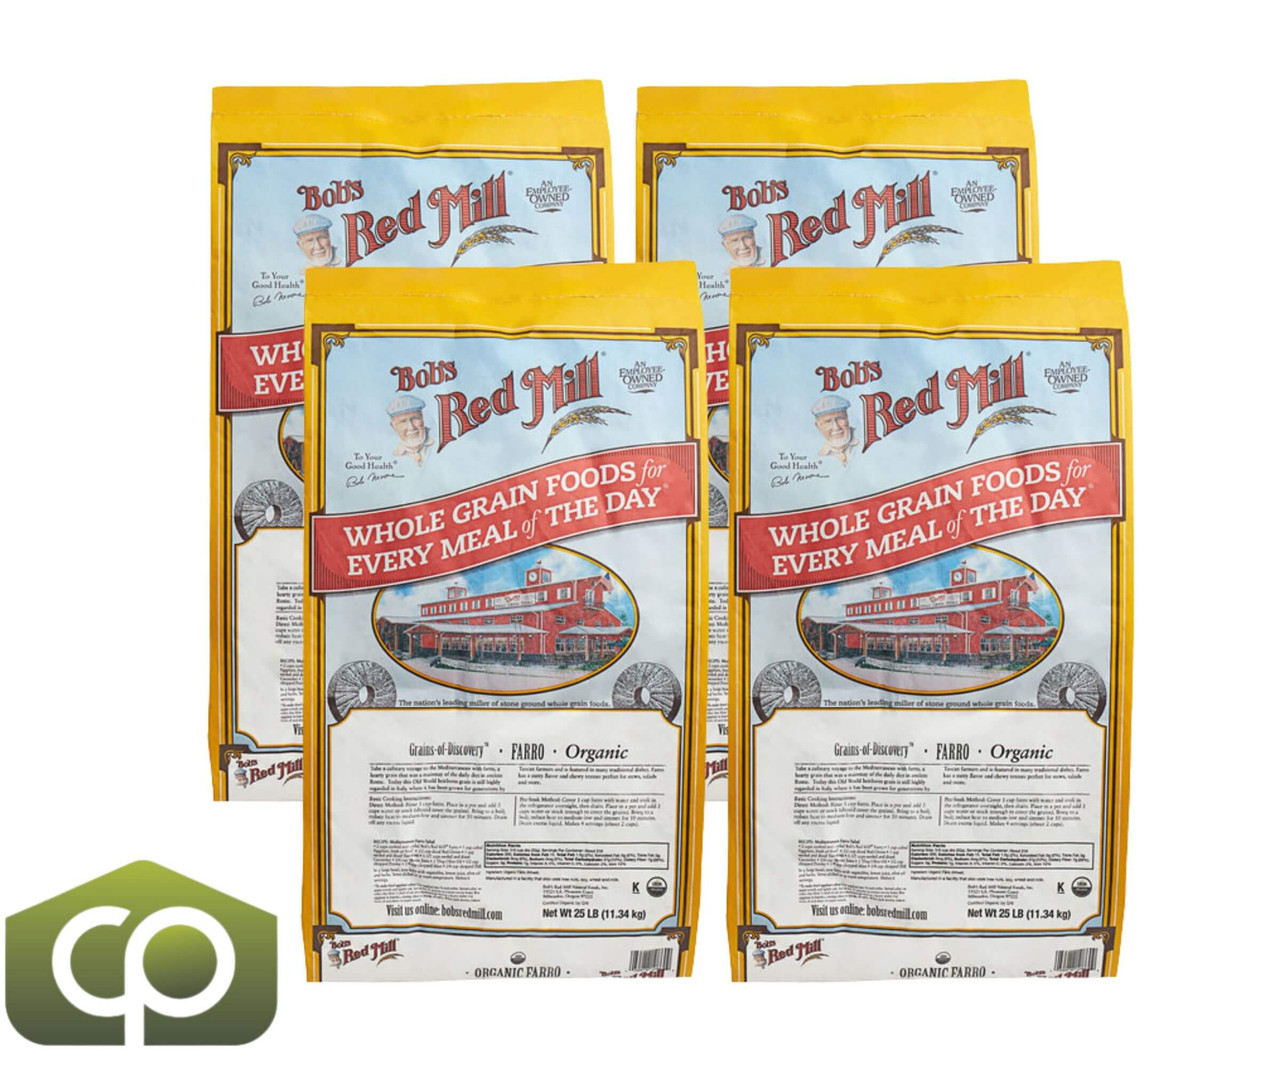 Bob's Red Mill 25 lbs. (11.34 kg) Organic Farro - Ancient Nutrient (60 BAGS/PALLET) - Chicken Pieces